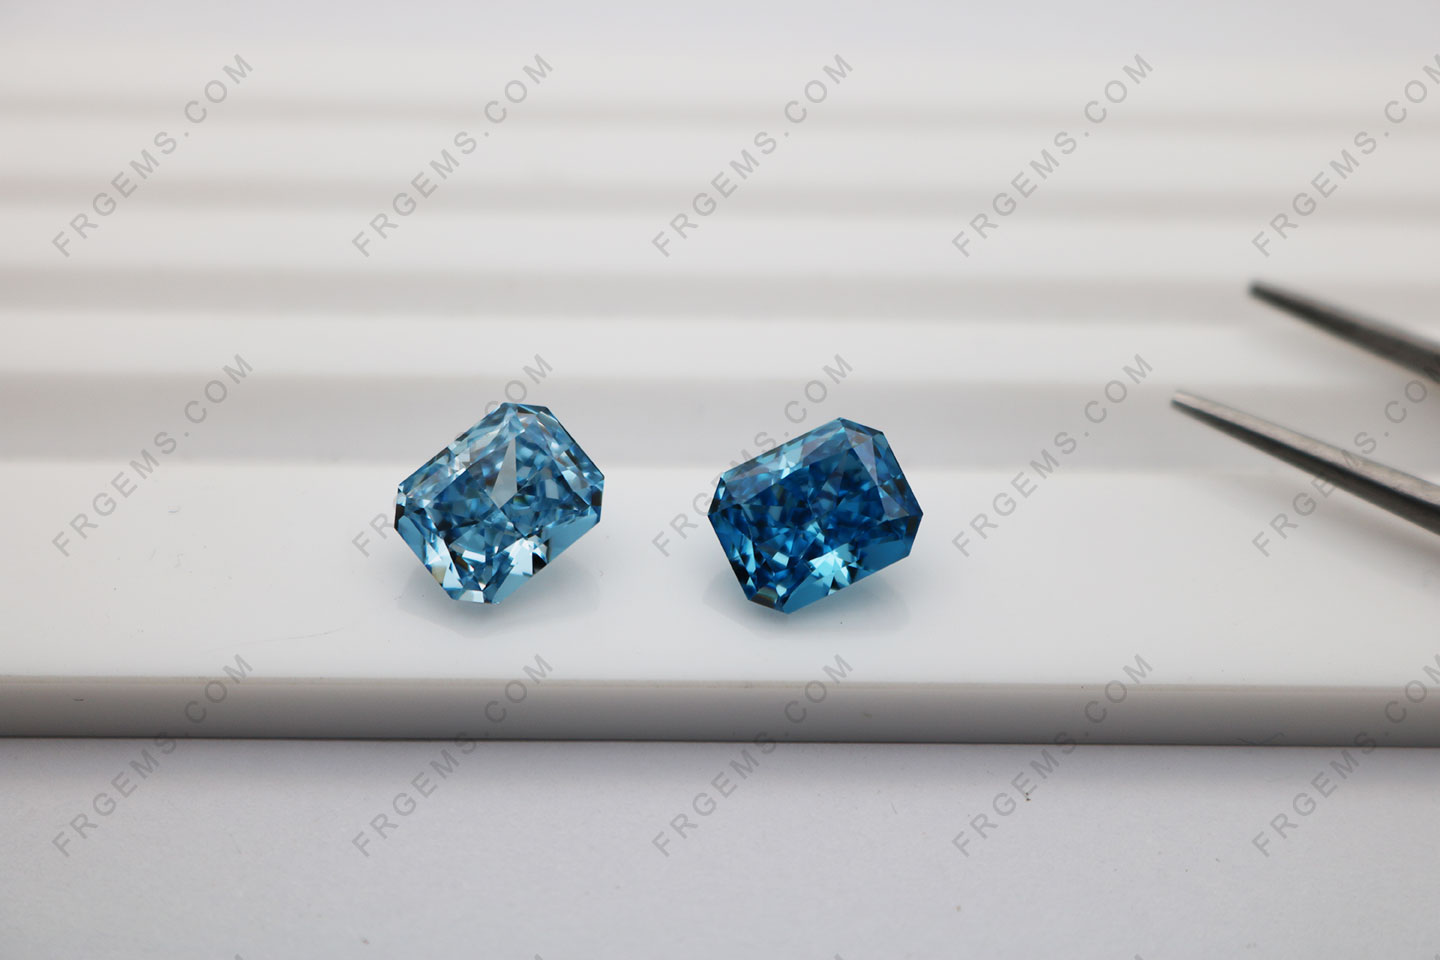 MAN MADE ROYAL BLUE SPINEL 12X10  MM BAGUETTE CUT OUTSTANDING COLOR AAA 